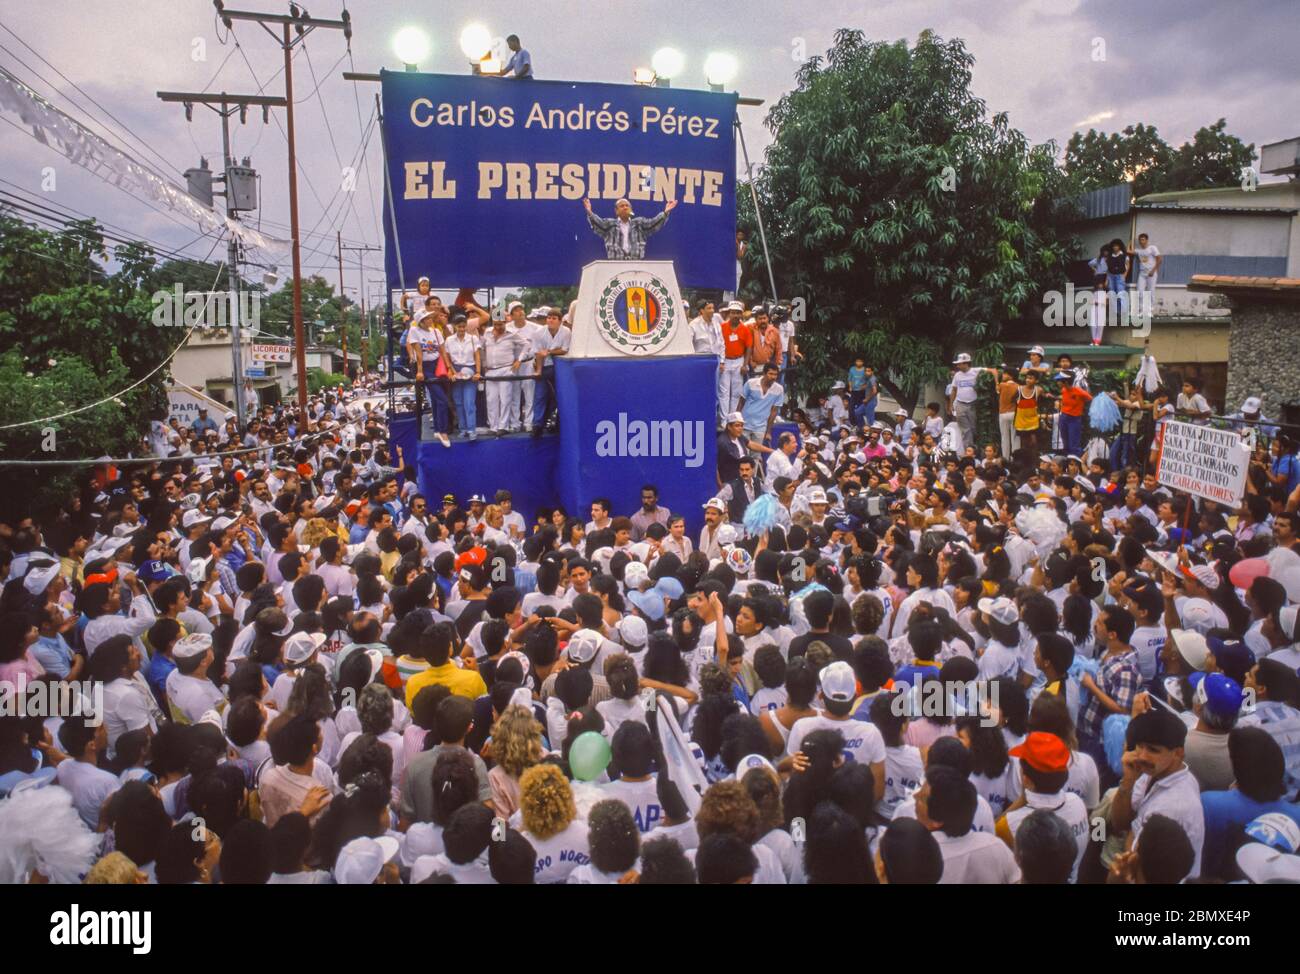 MARACAY, VENEZUELA, OCTOBER 1988 - Presidential candidate Carlos Andres Perez speaks at campaign rally. Stock Photo